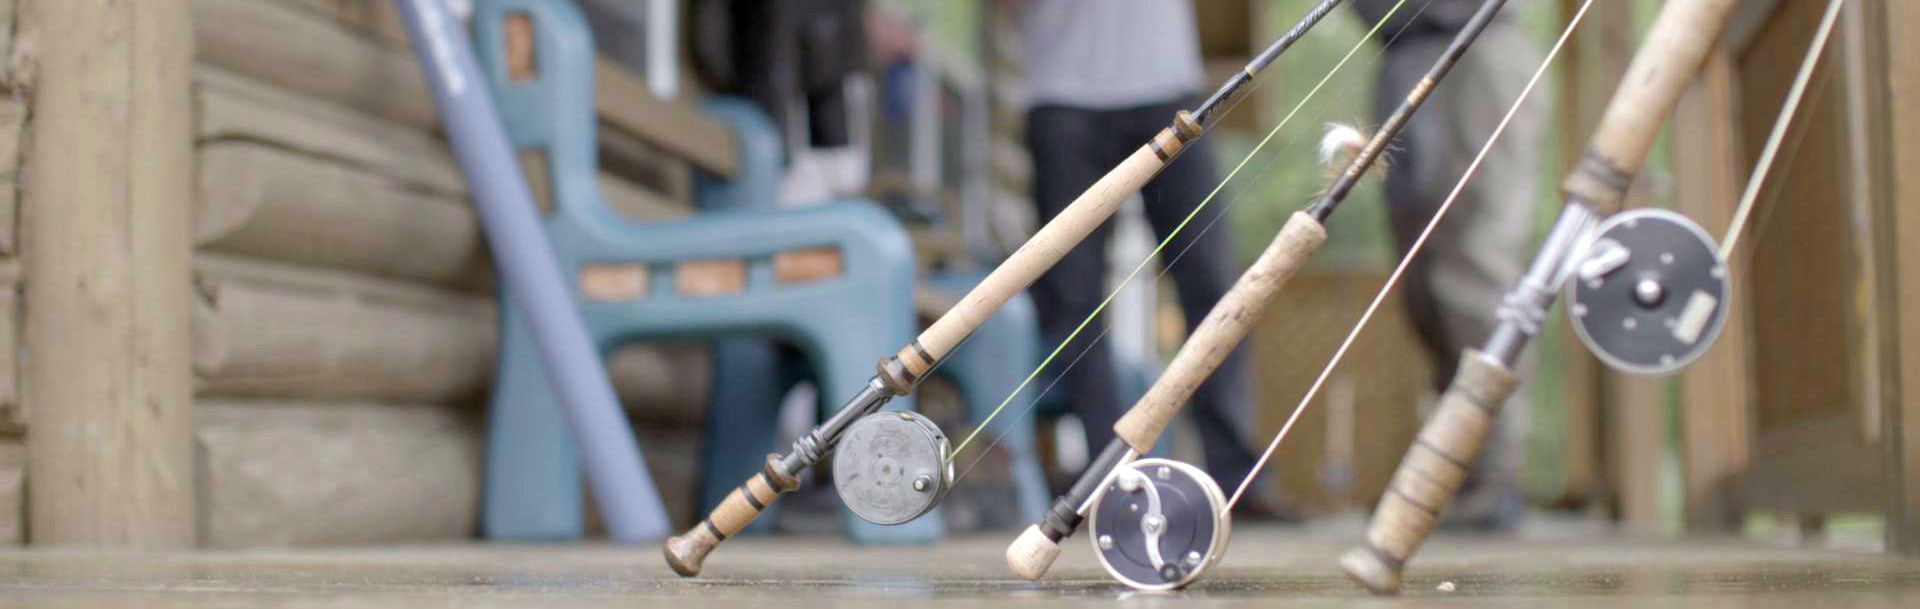 3 fly fishing rods